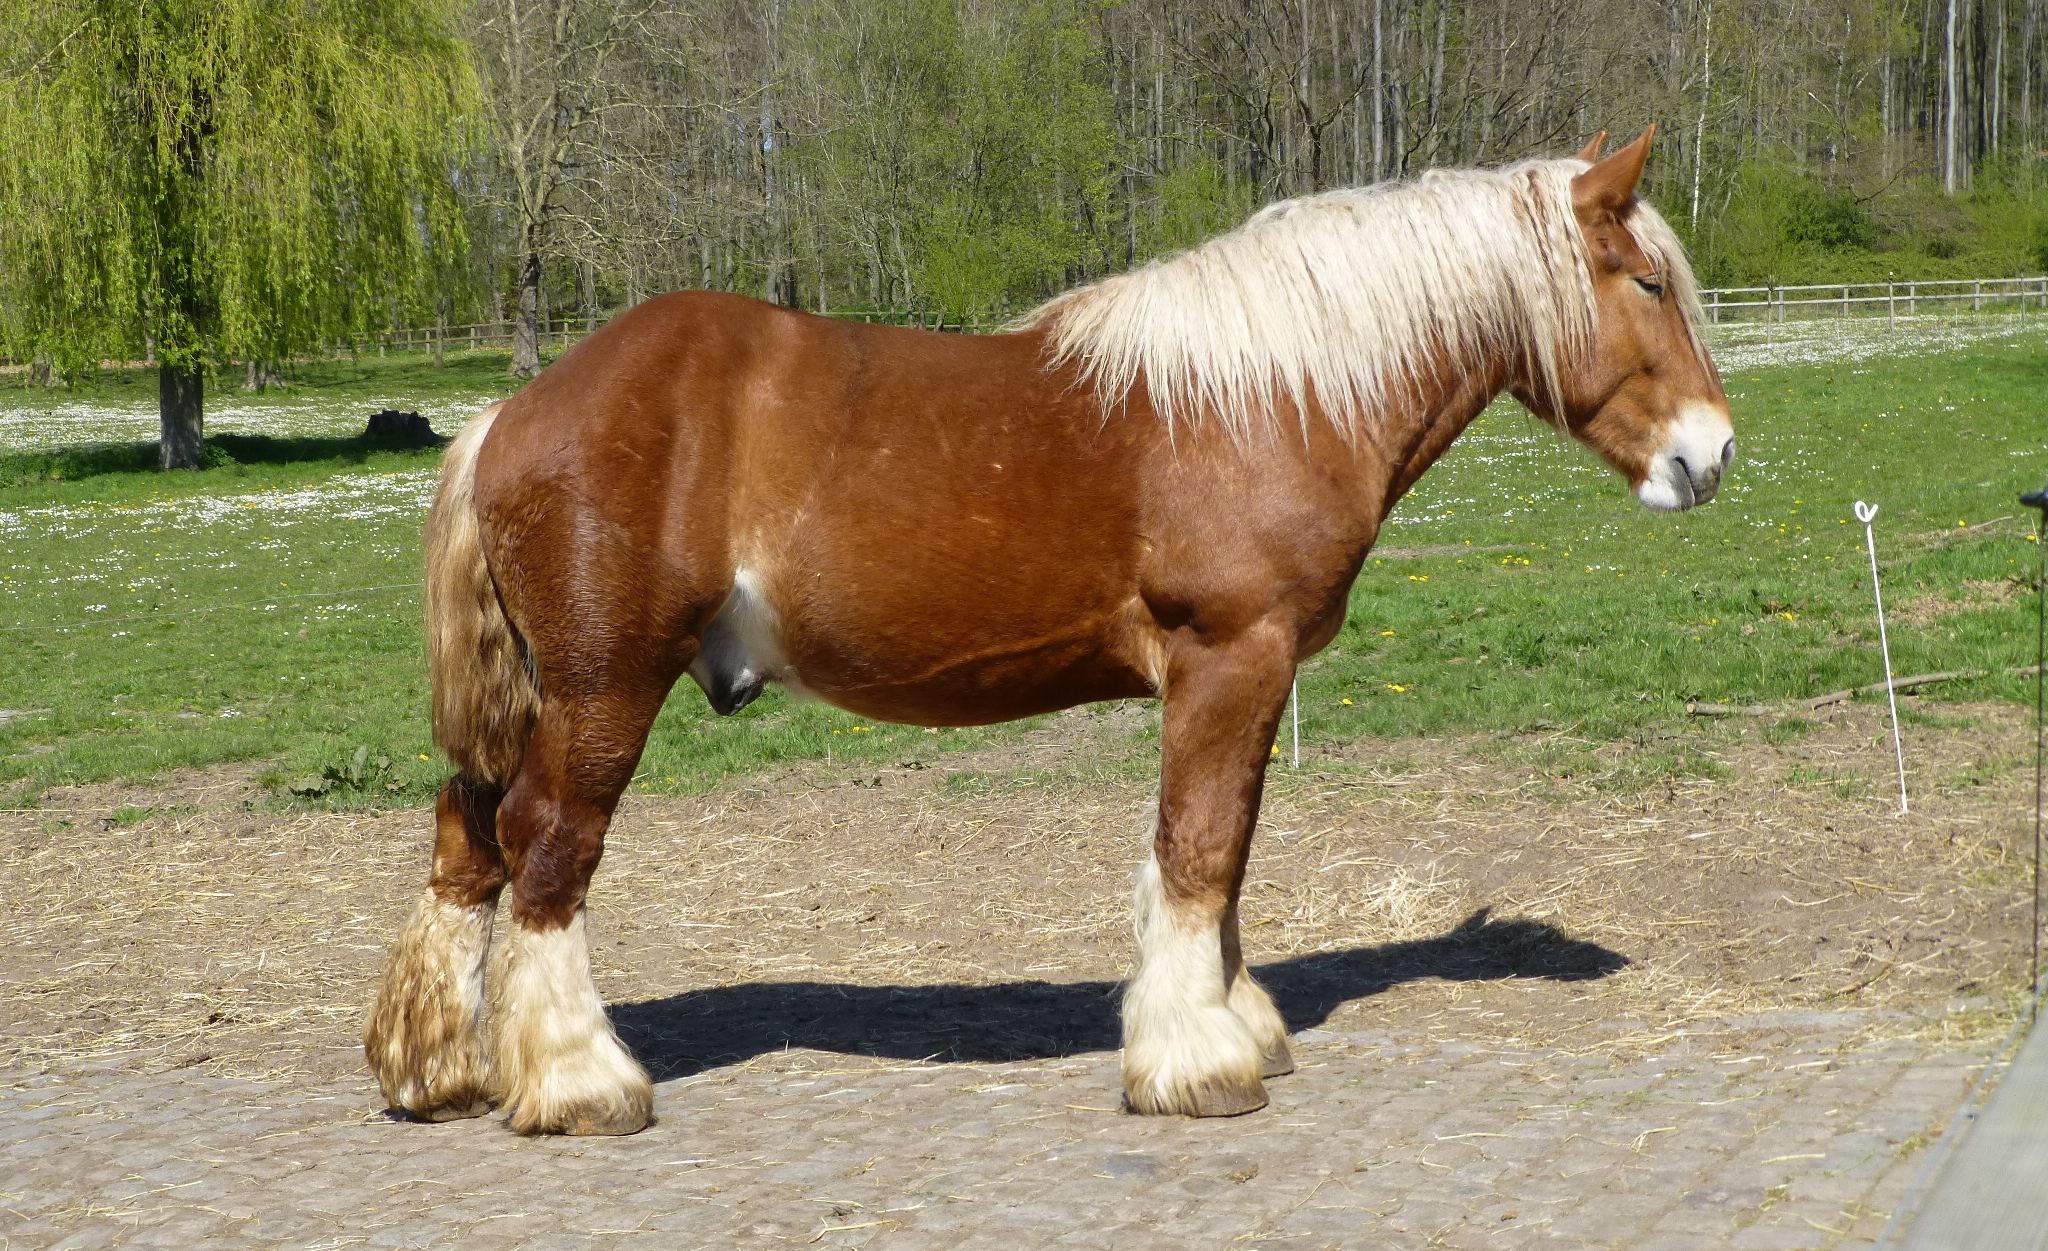 Flemish Horse Profile: Facts, Traits, Groom, Care, Health, Diet